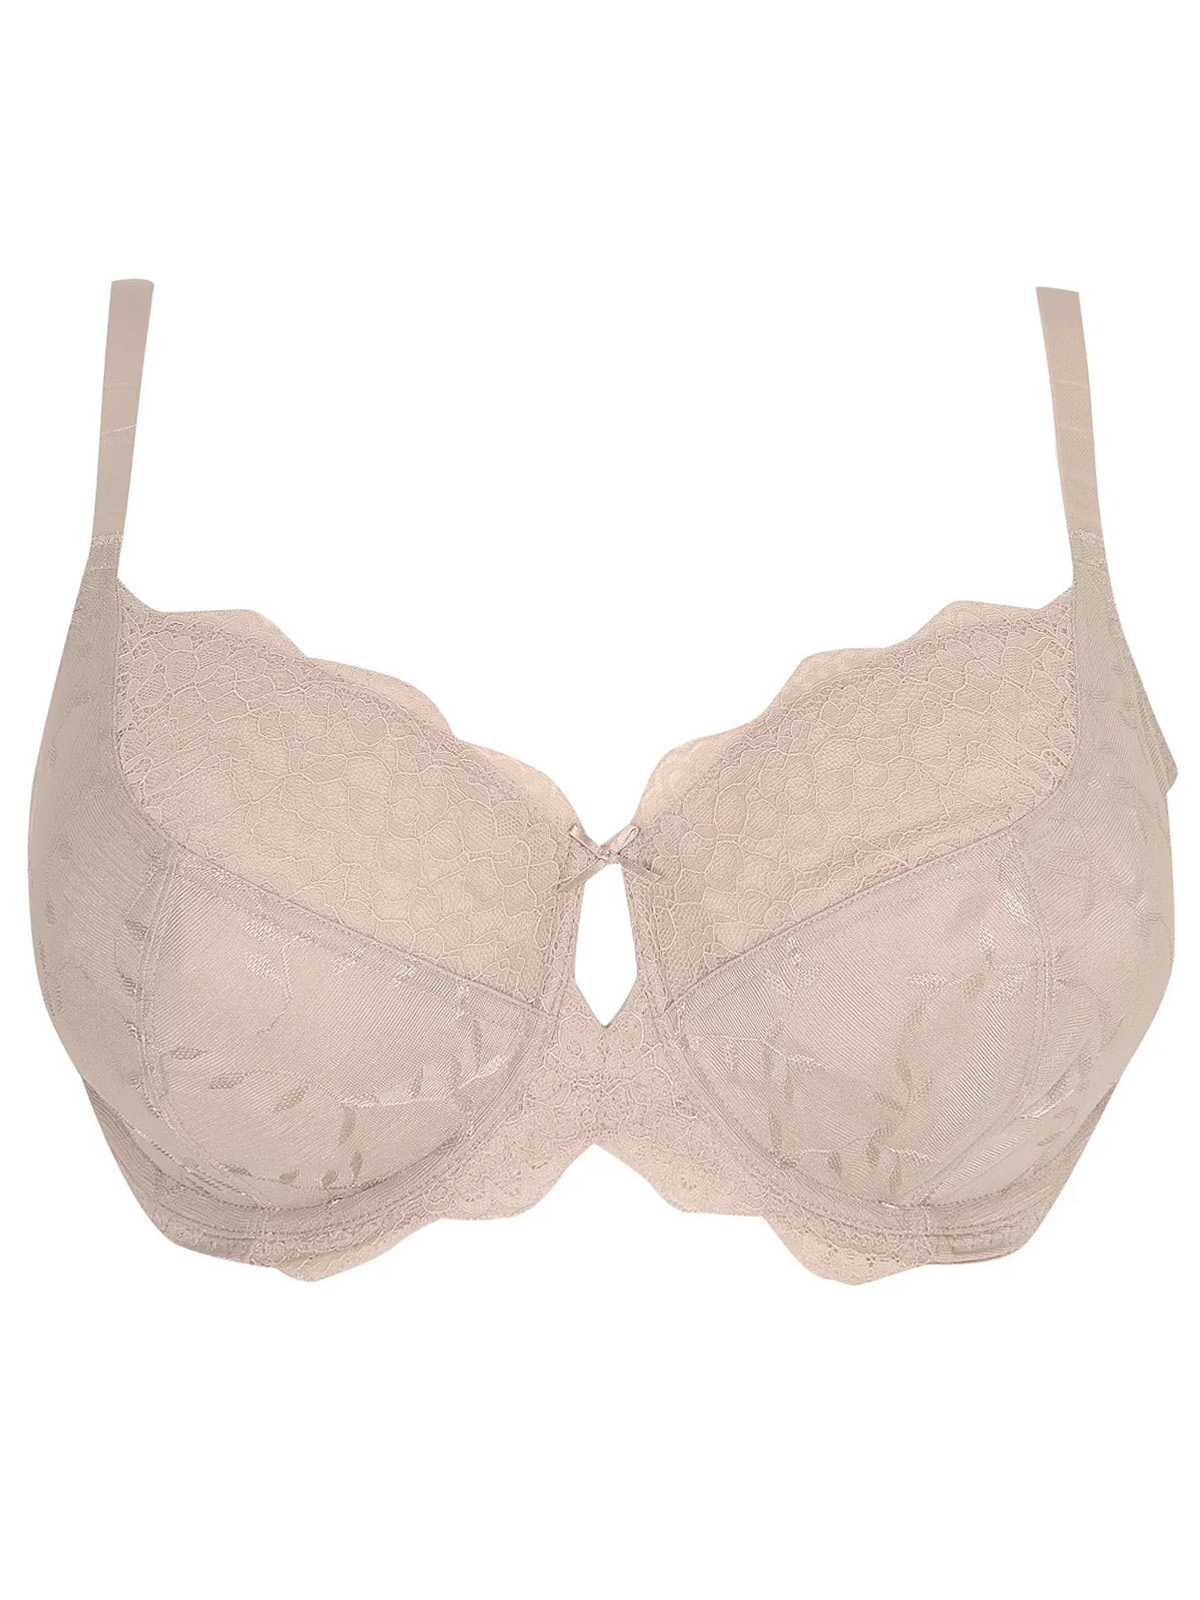 George G3orge Nude Floral Jacquard Lace Non Padded Full Cup Bra Size 38 C D G